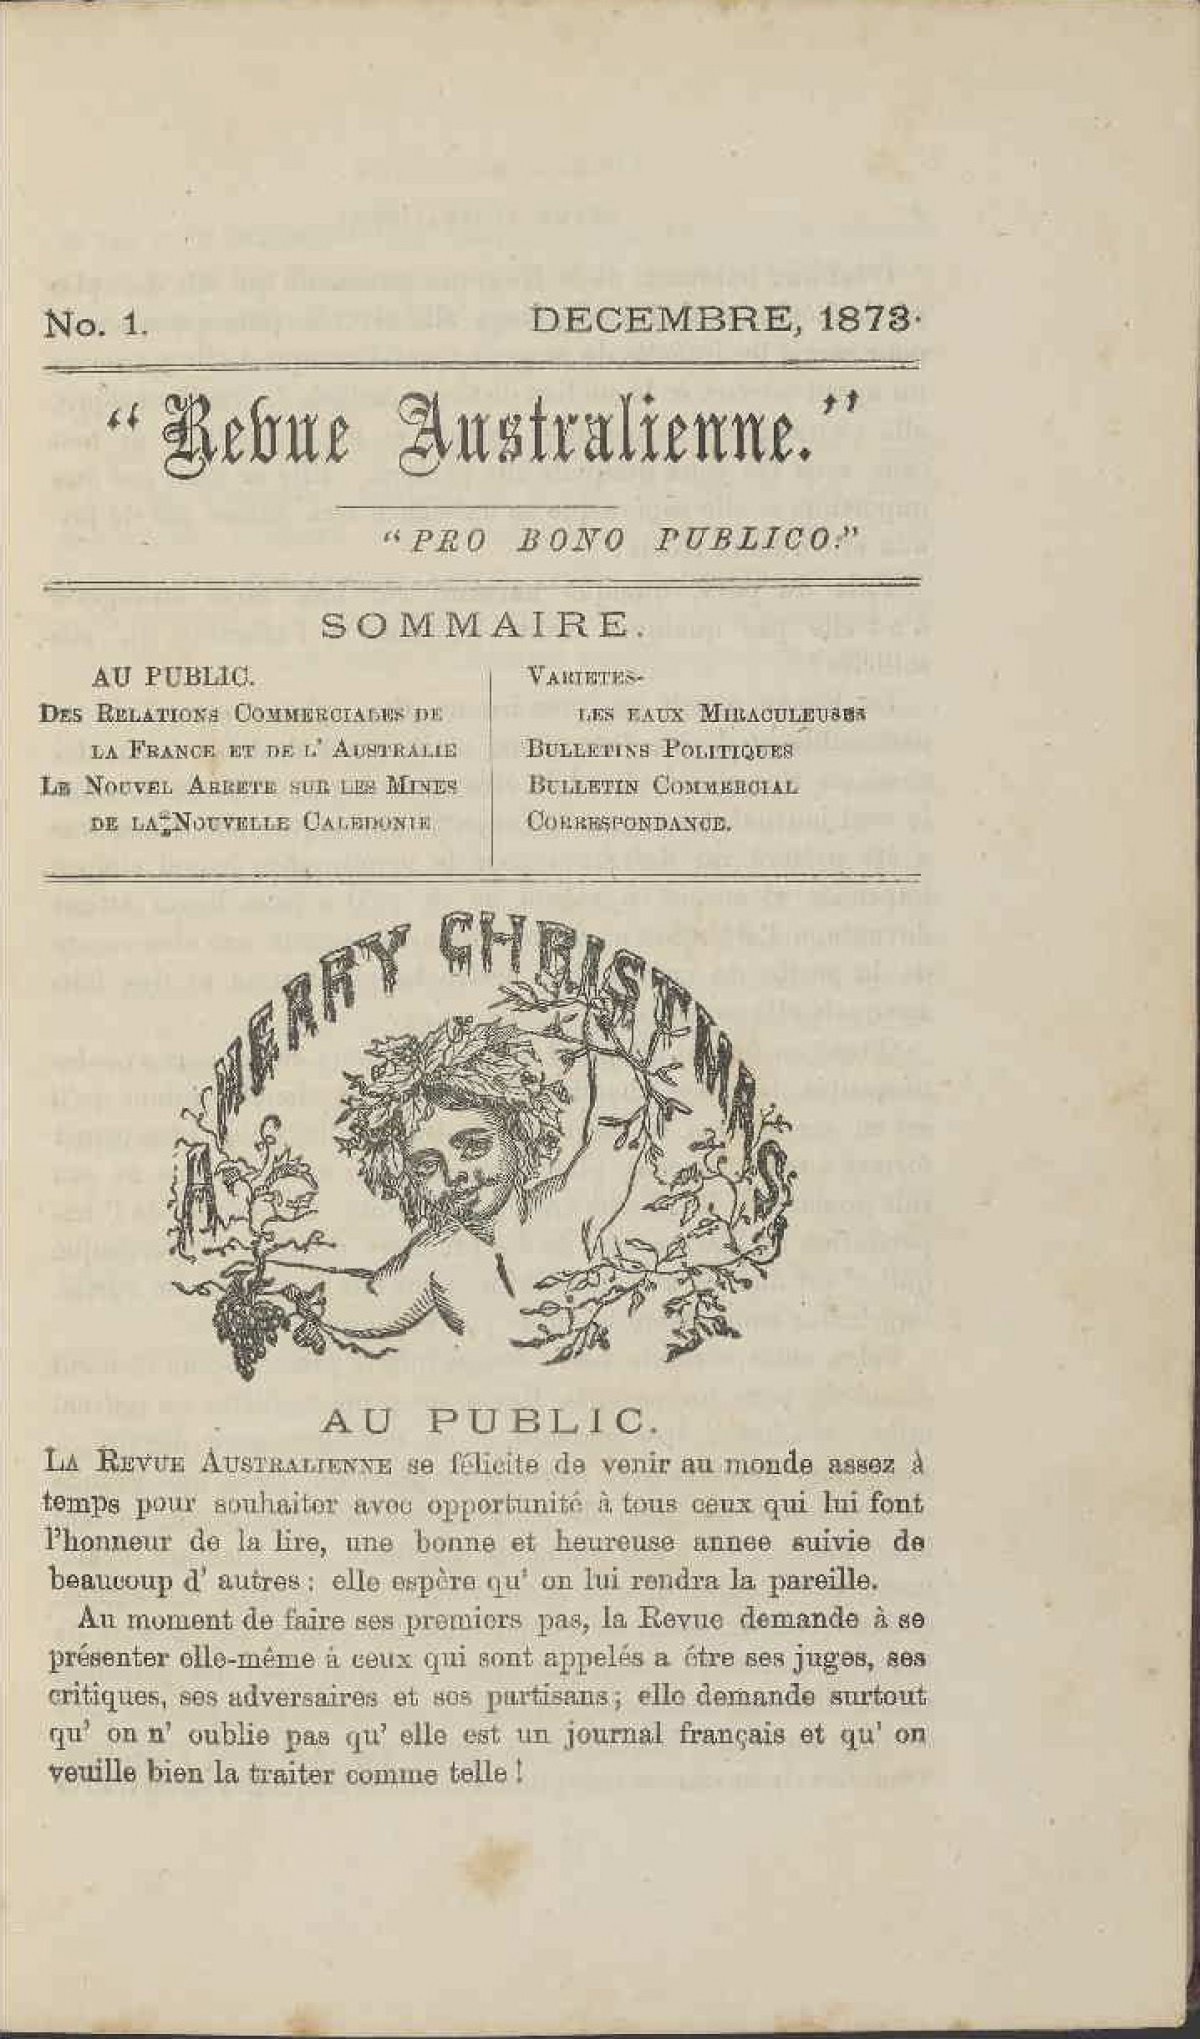 A page from a French newspaper celebrating Christmas in 1878 in Ausralia.